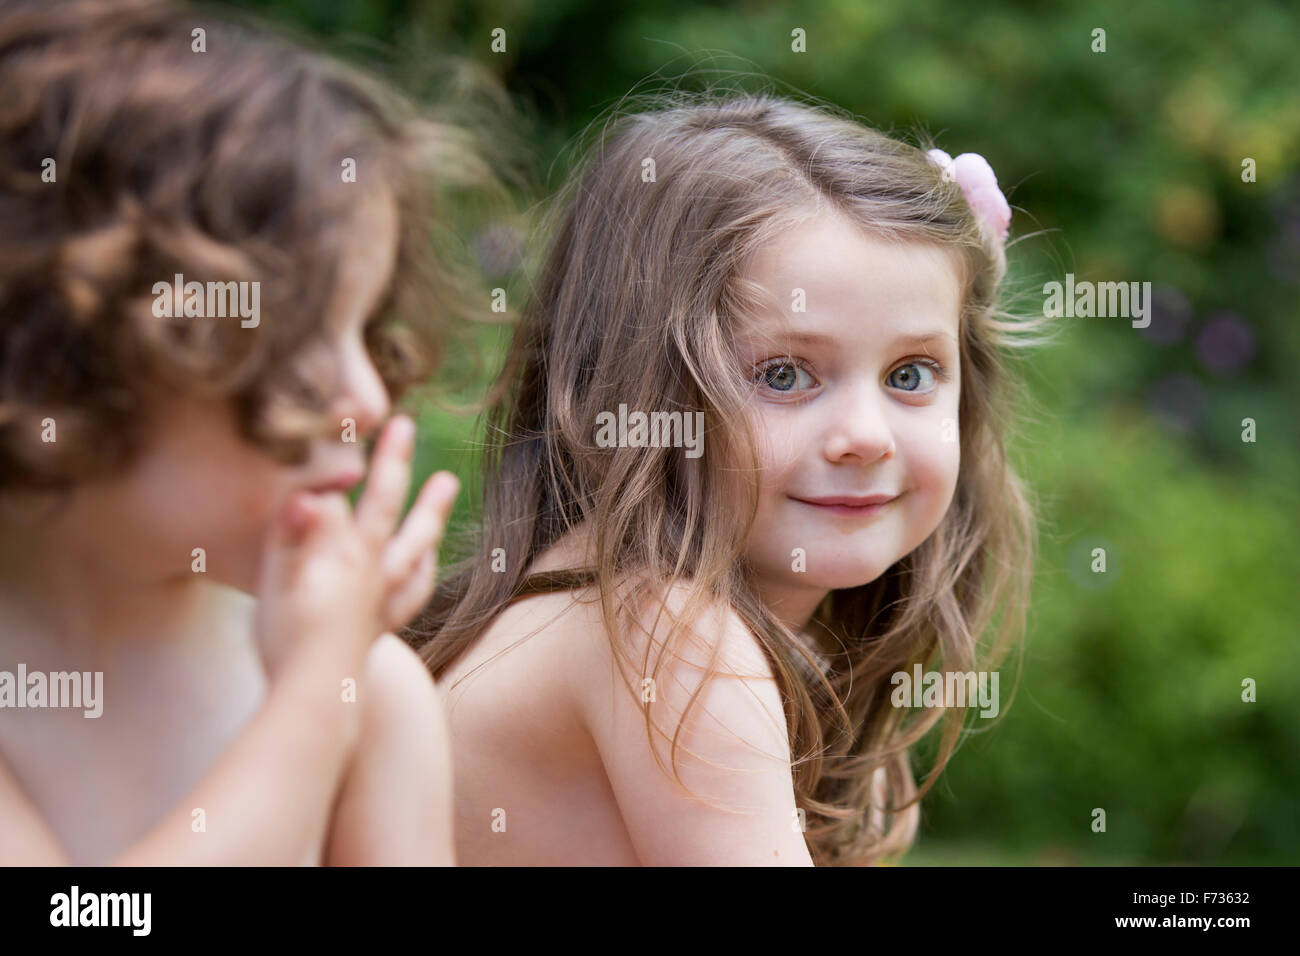 Two smiling young girls at a garden party. Stock Photo